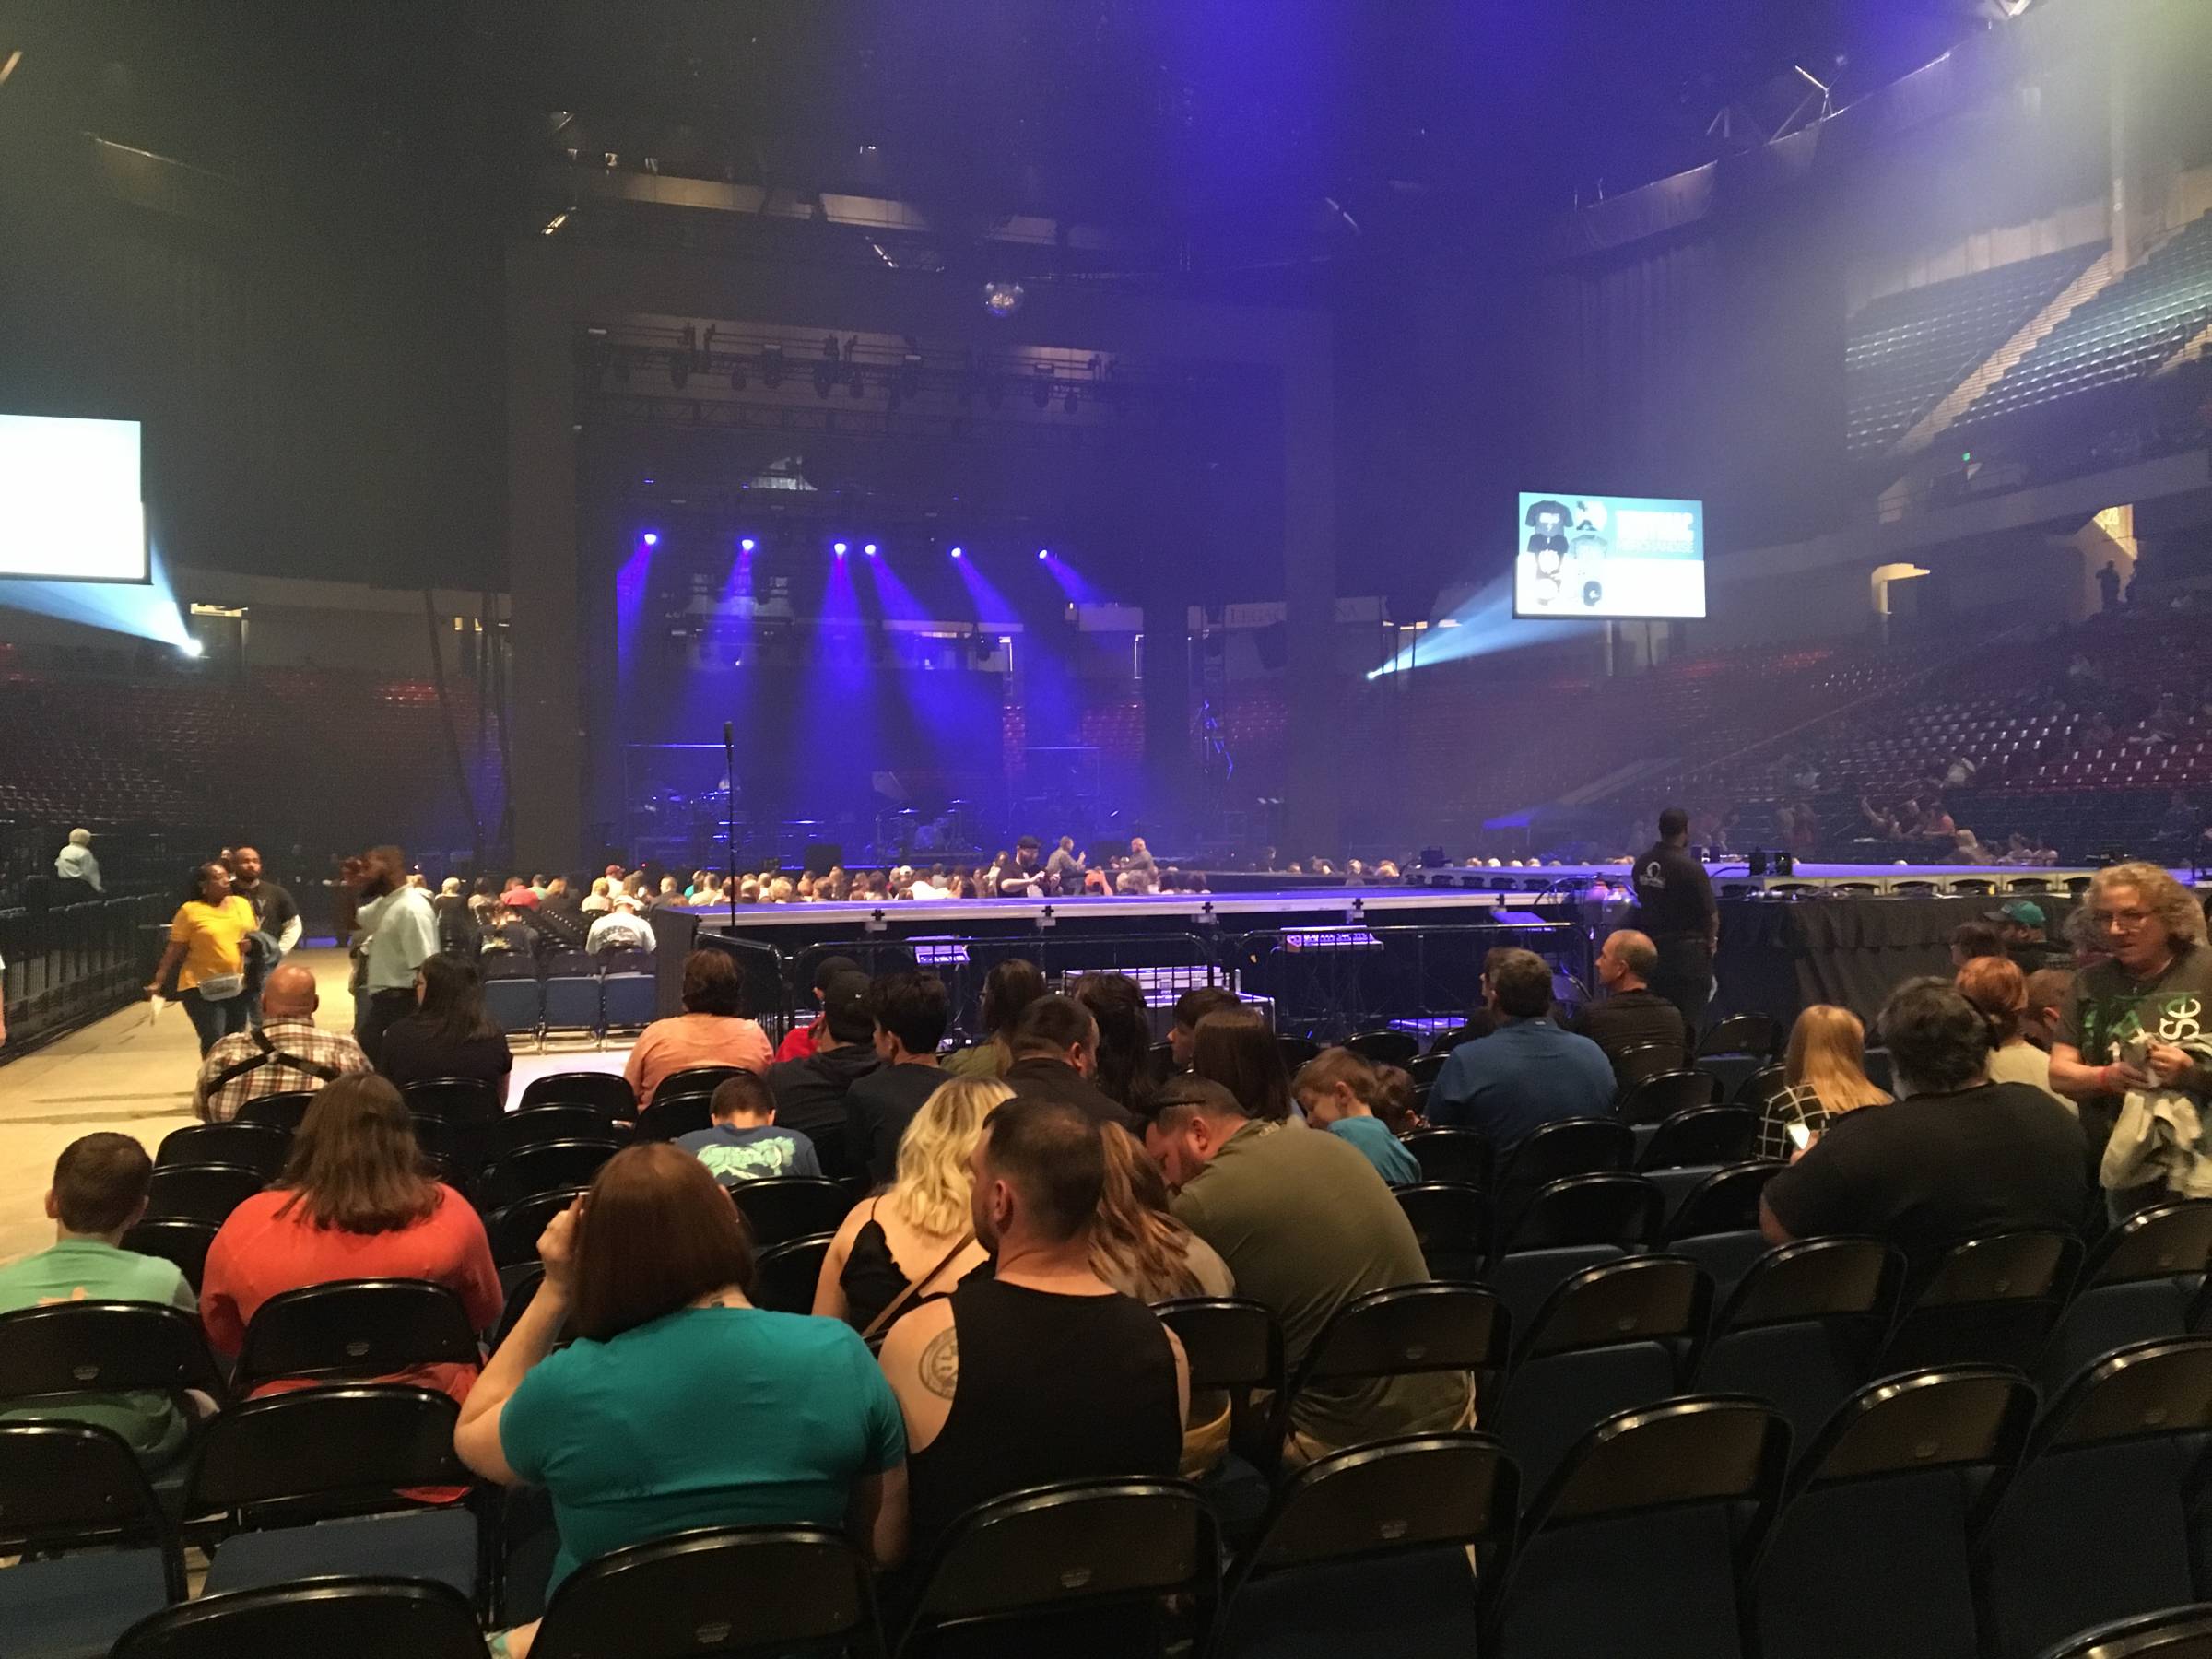 Legacy Arena At The Bjcc Floor Seats For Concerts Rateyourseats Com